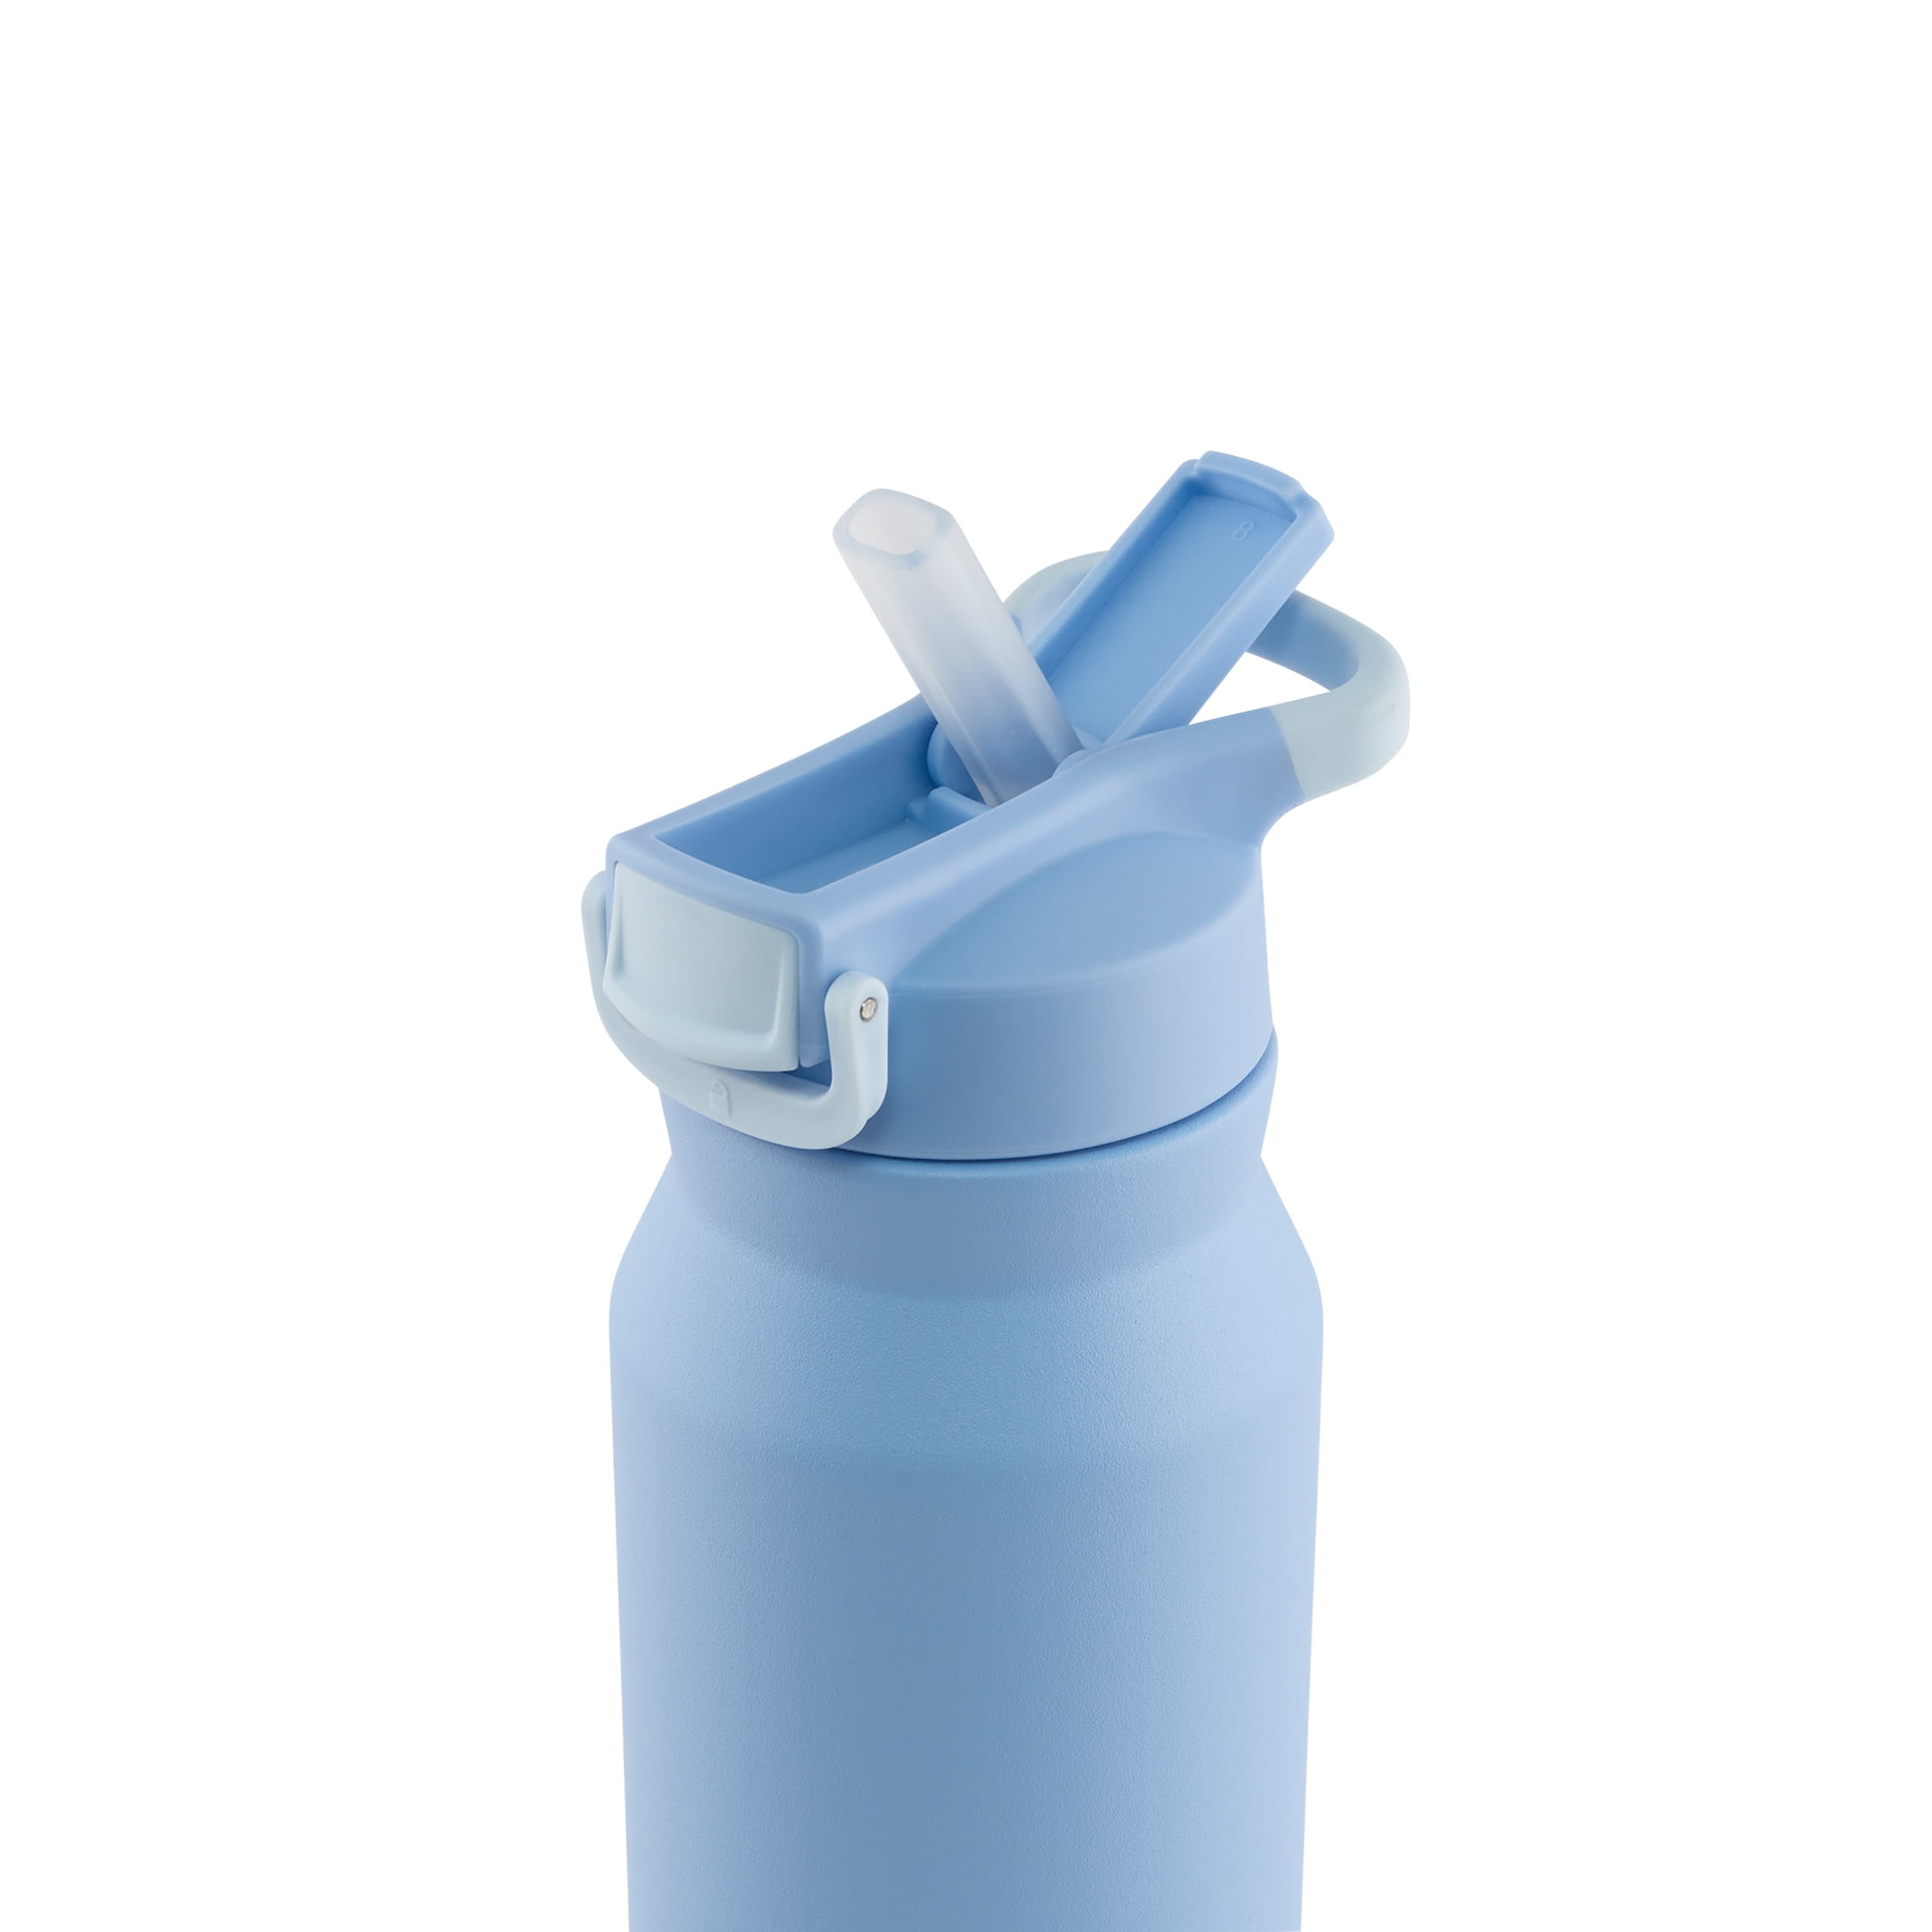 Secura Vacuum Insulated Stainless Steel Straw Water Bottle with Handle,  350ML/12OZ,Blue - The Secura